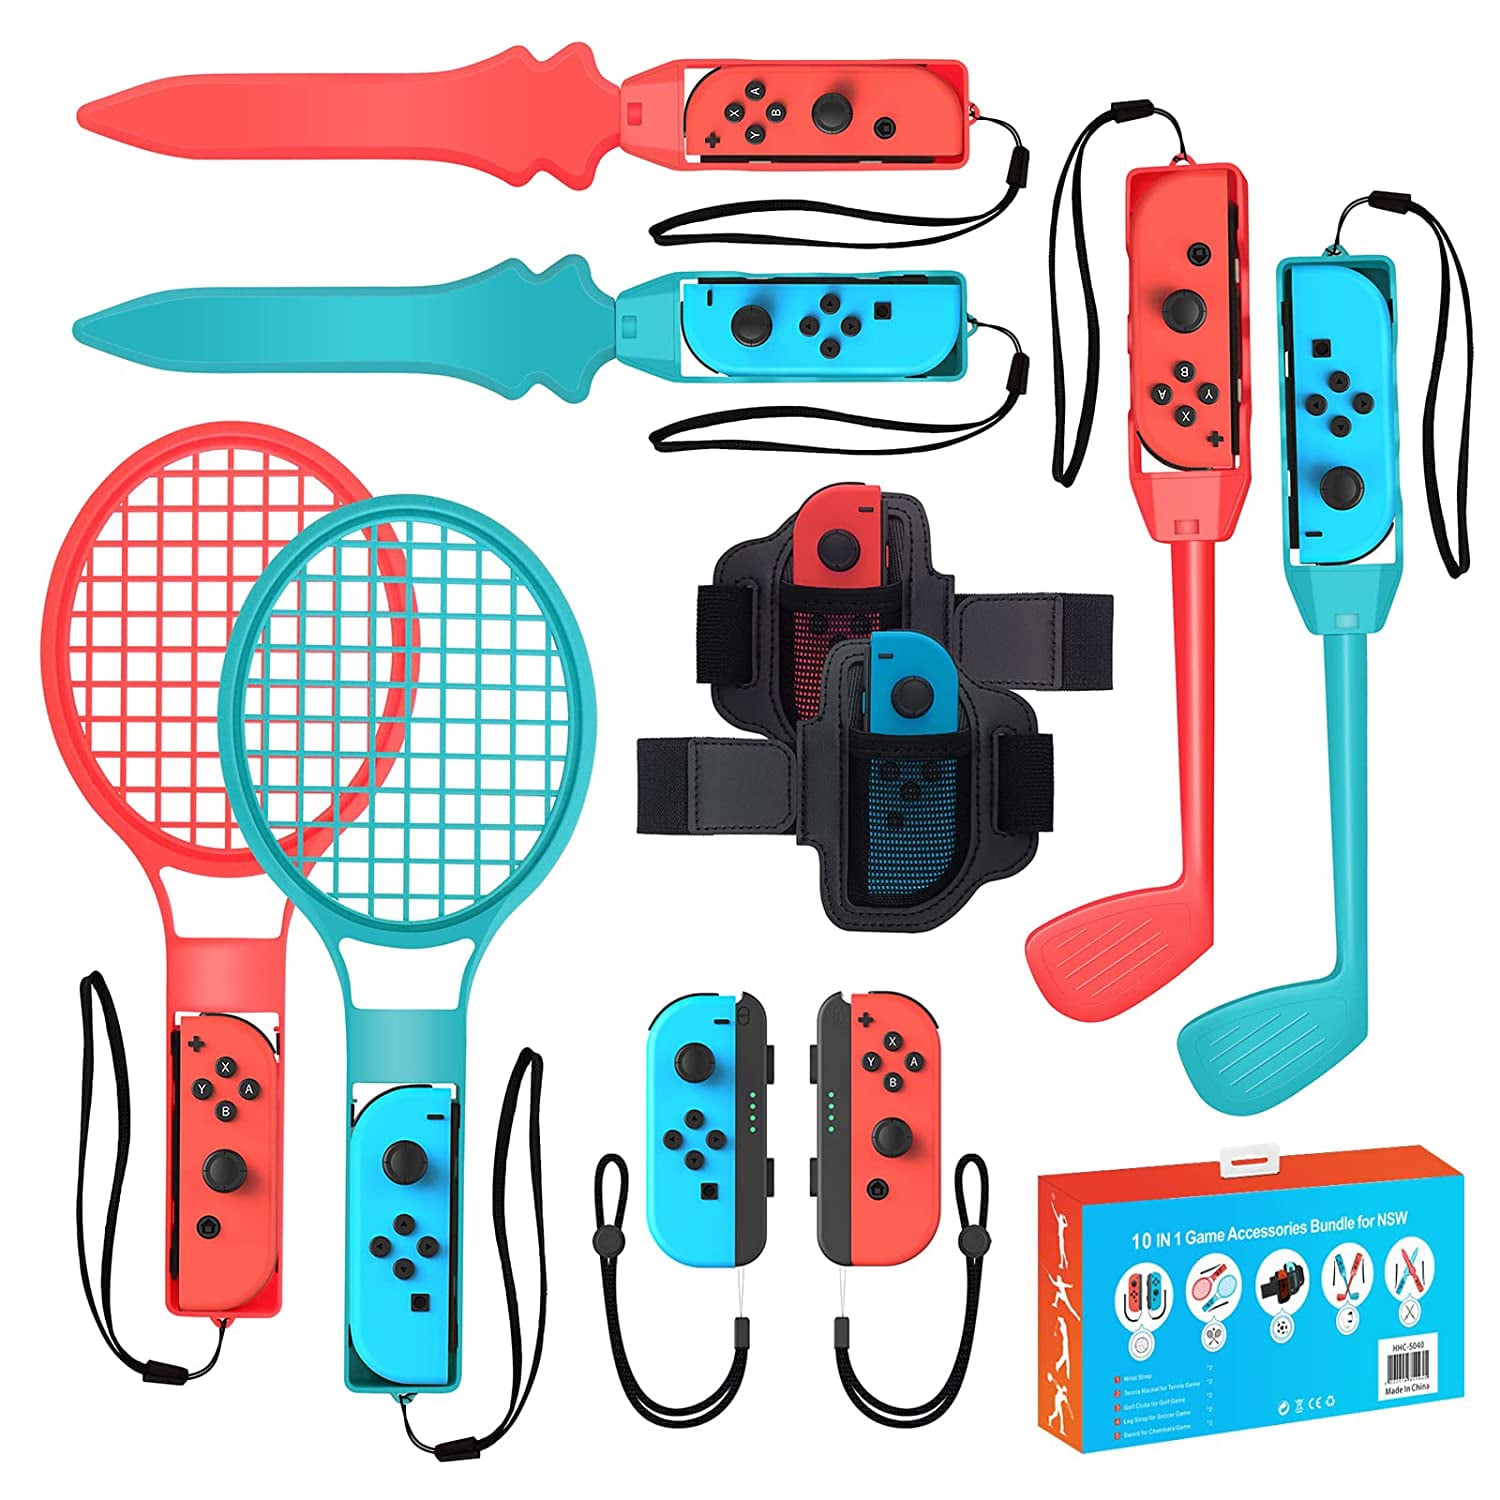 2022 Nintendo Switch Sports Accessories Bundle -10 in 1 Family Accessories Kit for Switch Sports Games Compatible with Switch/Switch OLED